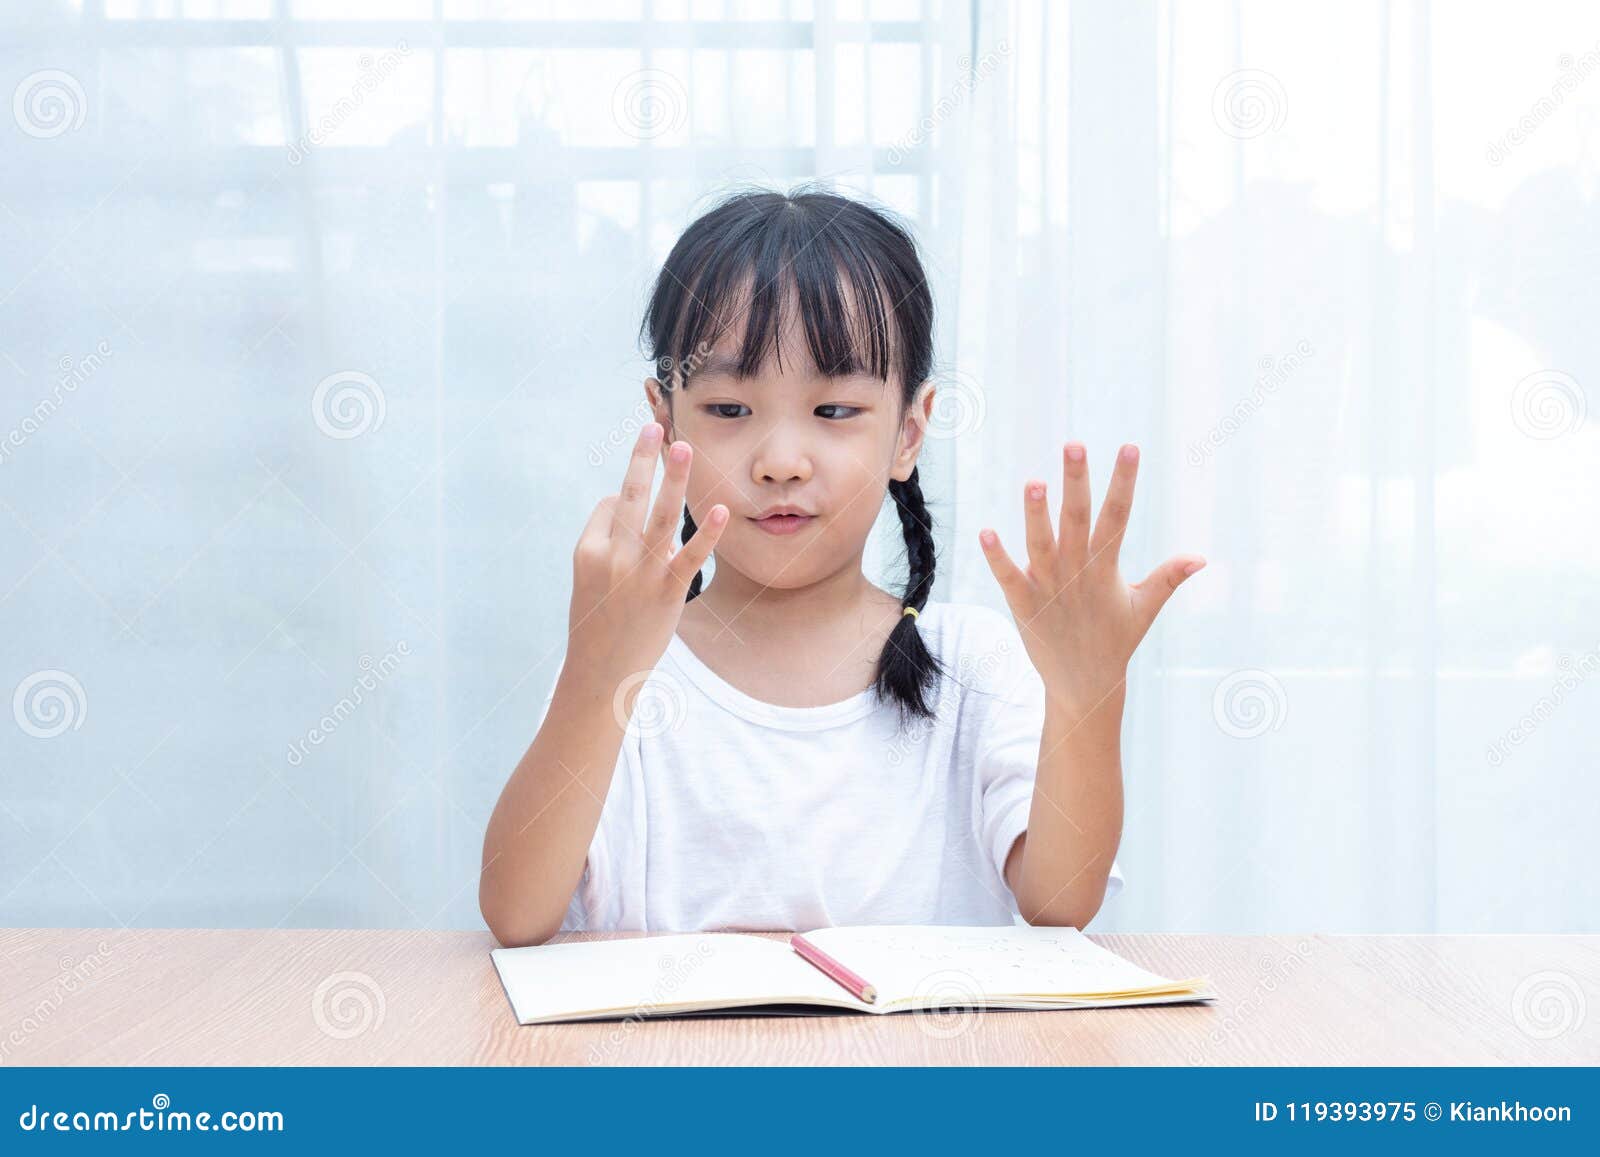 asian little chinese girl doing mathematics by counting fingers